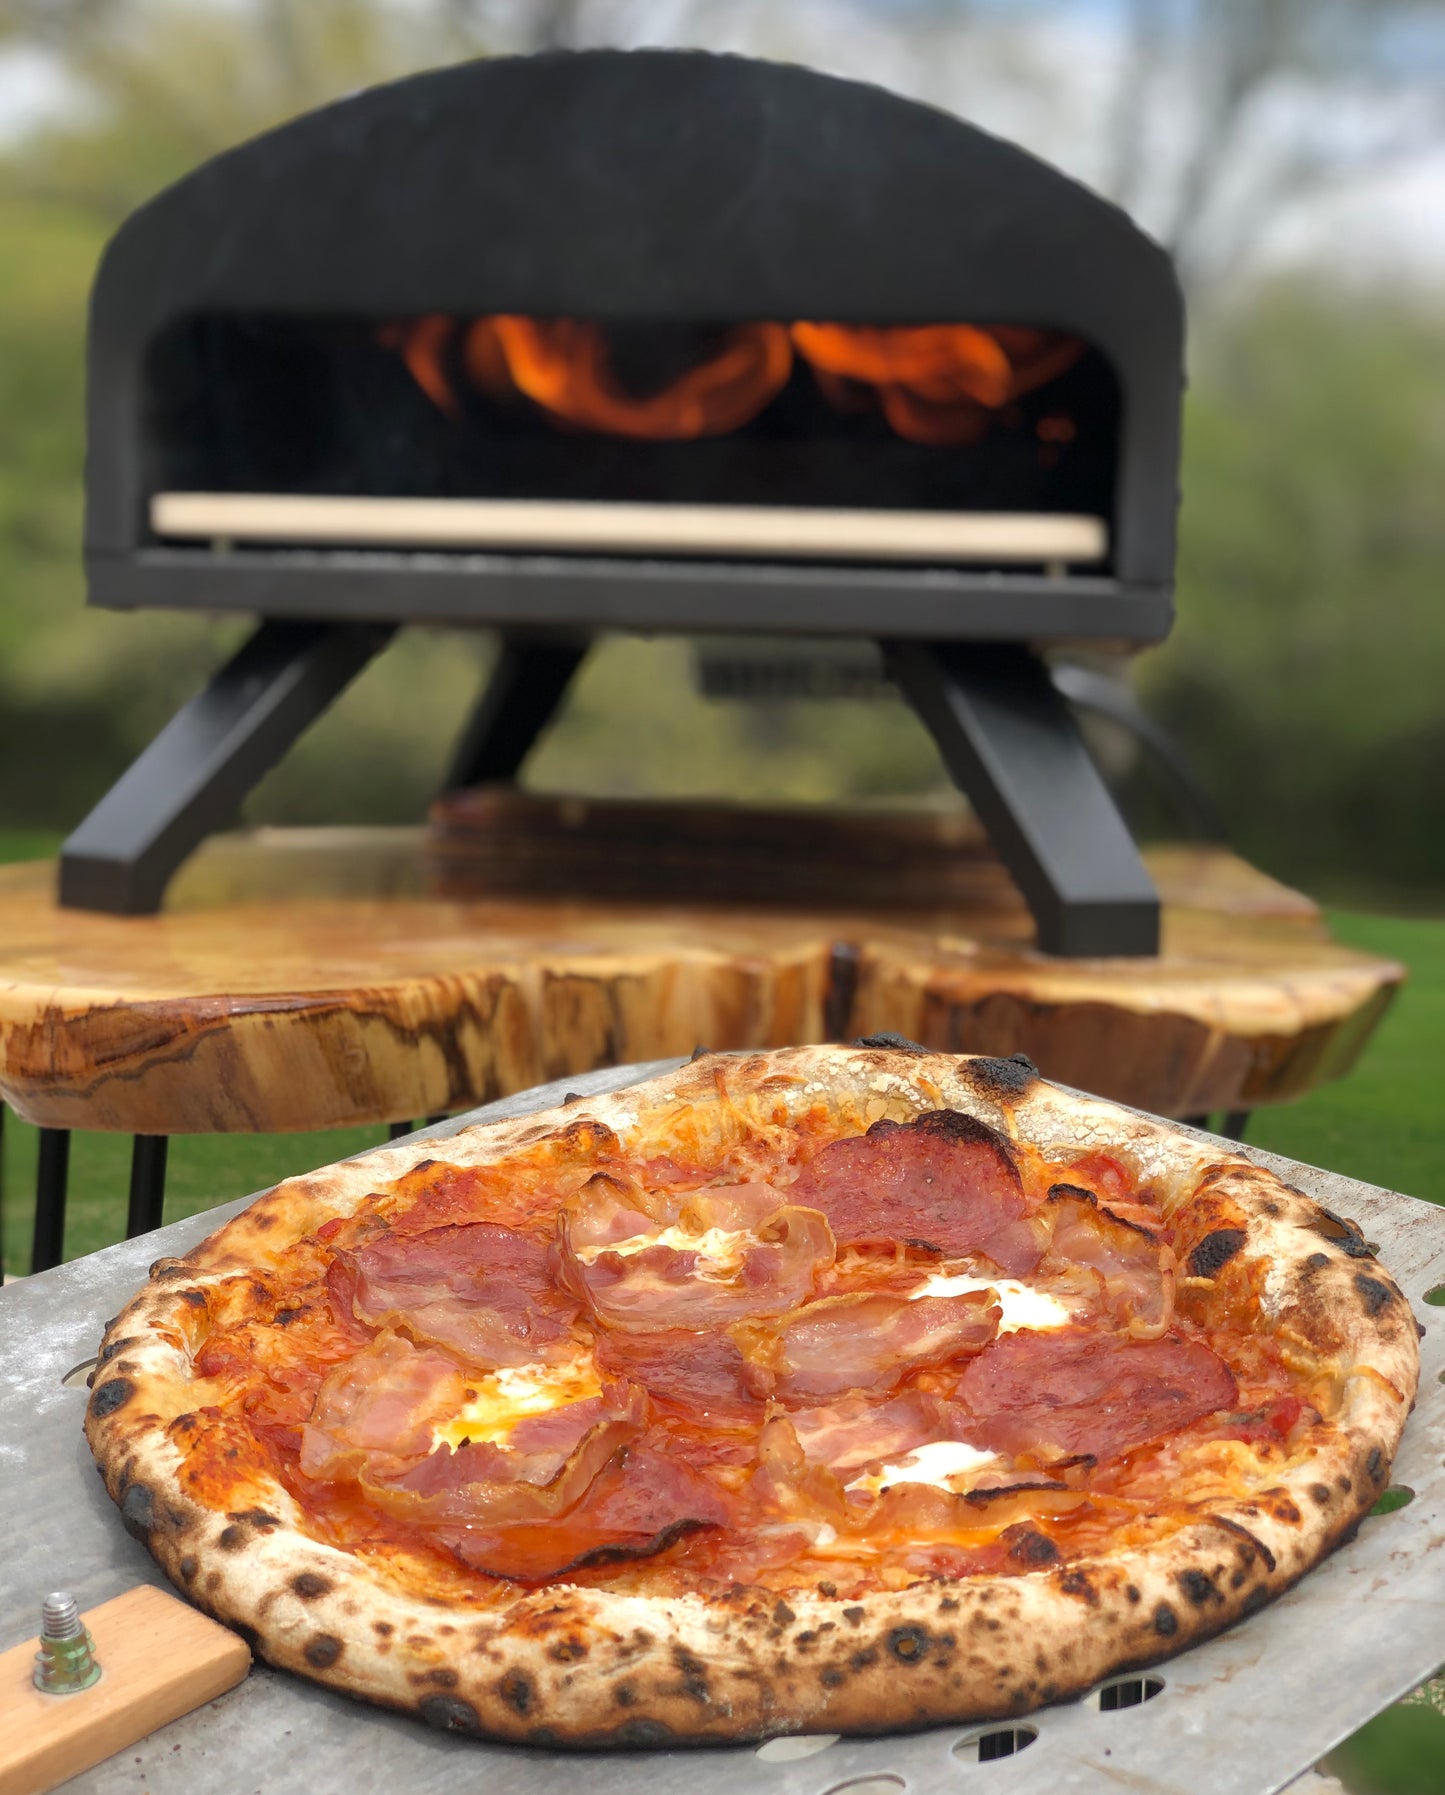 
                  
                    Bertello Outdoor Pizza Oven Everything Bundle - Gas, Wood & Charcoal Fired Simultaneously - Outdoor Pizza Oven. Portable Pizza Oven AS SEEN ON SHARK TANK - PATENTED
                  
                